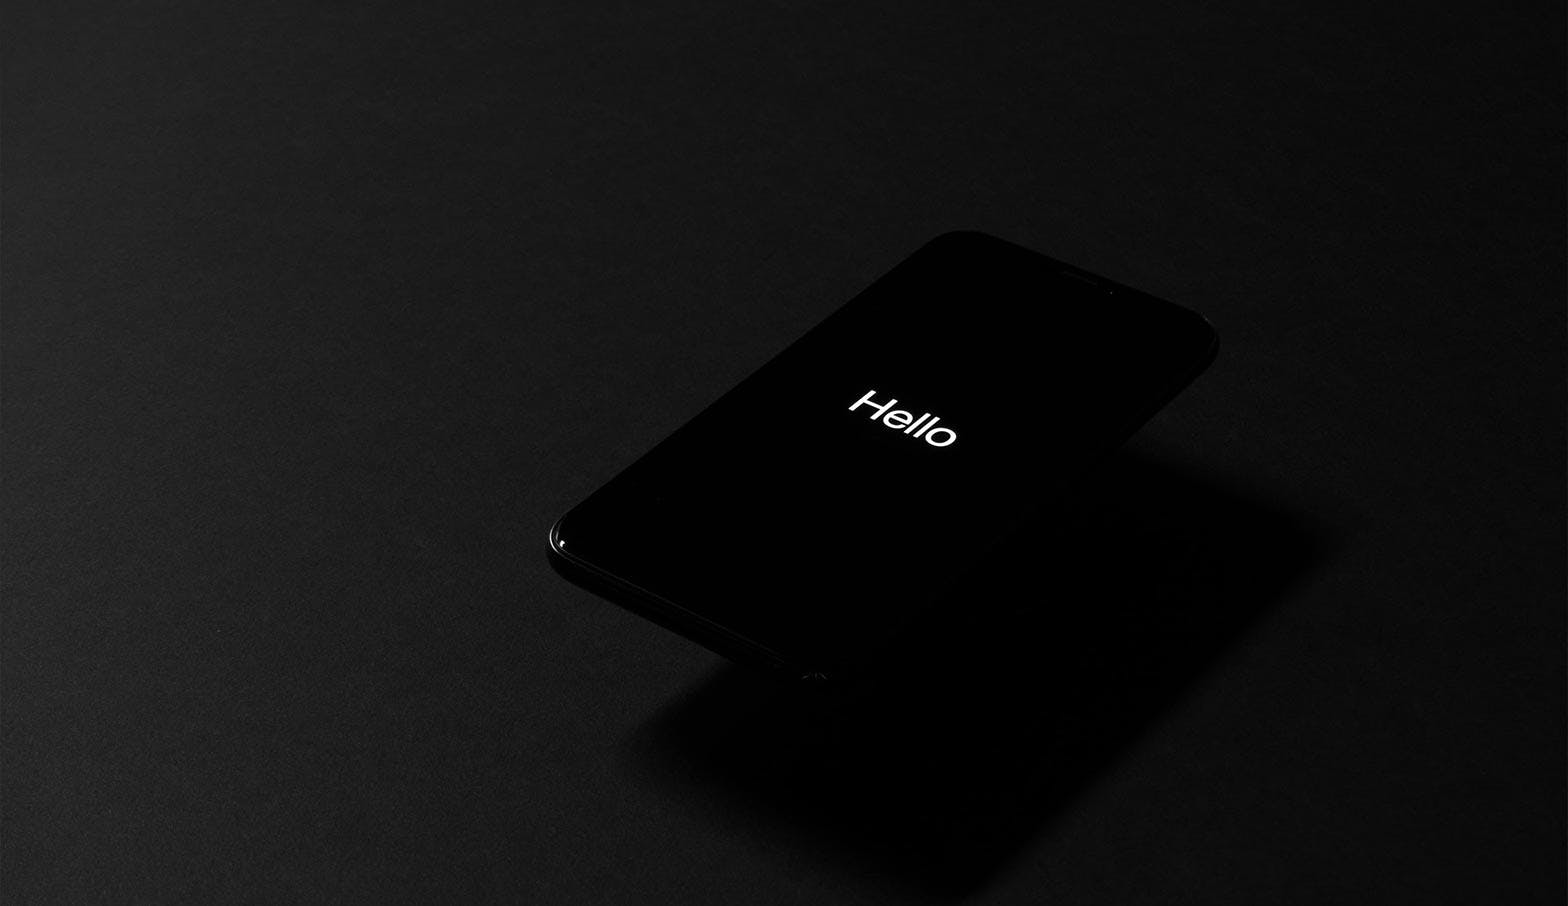 A mobile phone with the word 'Hello' on screen